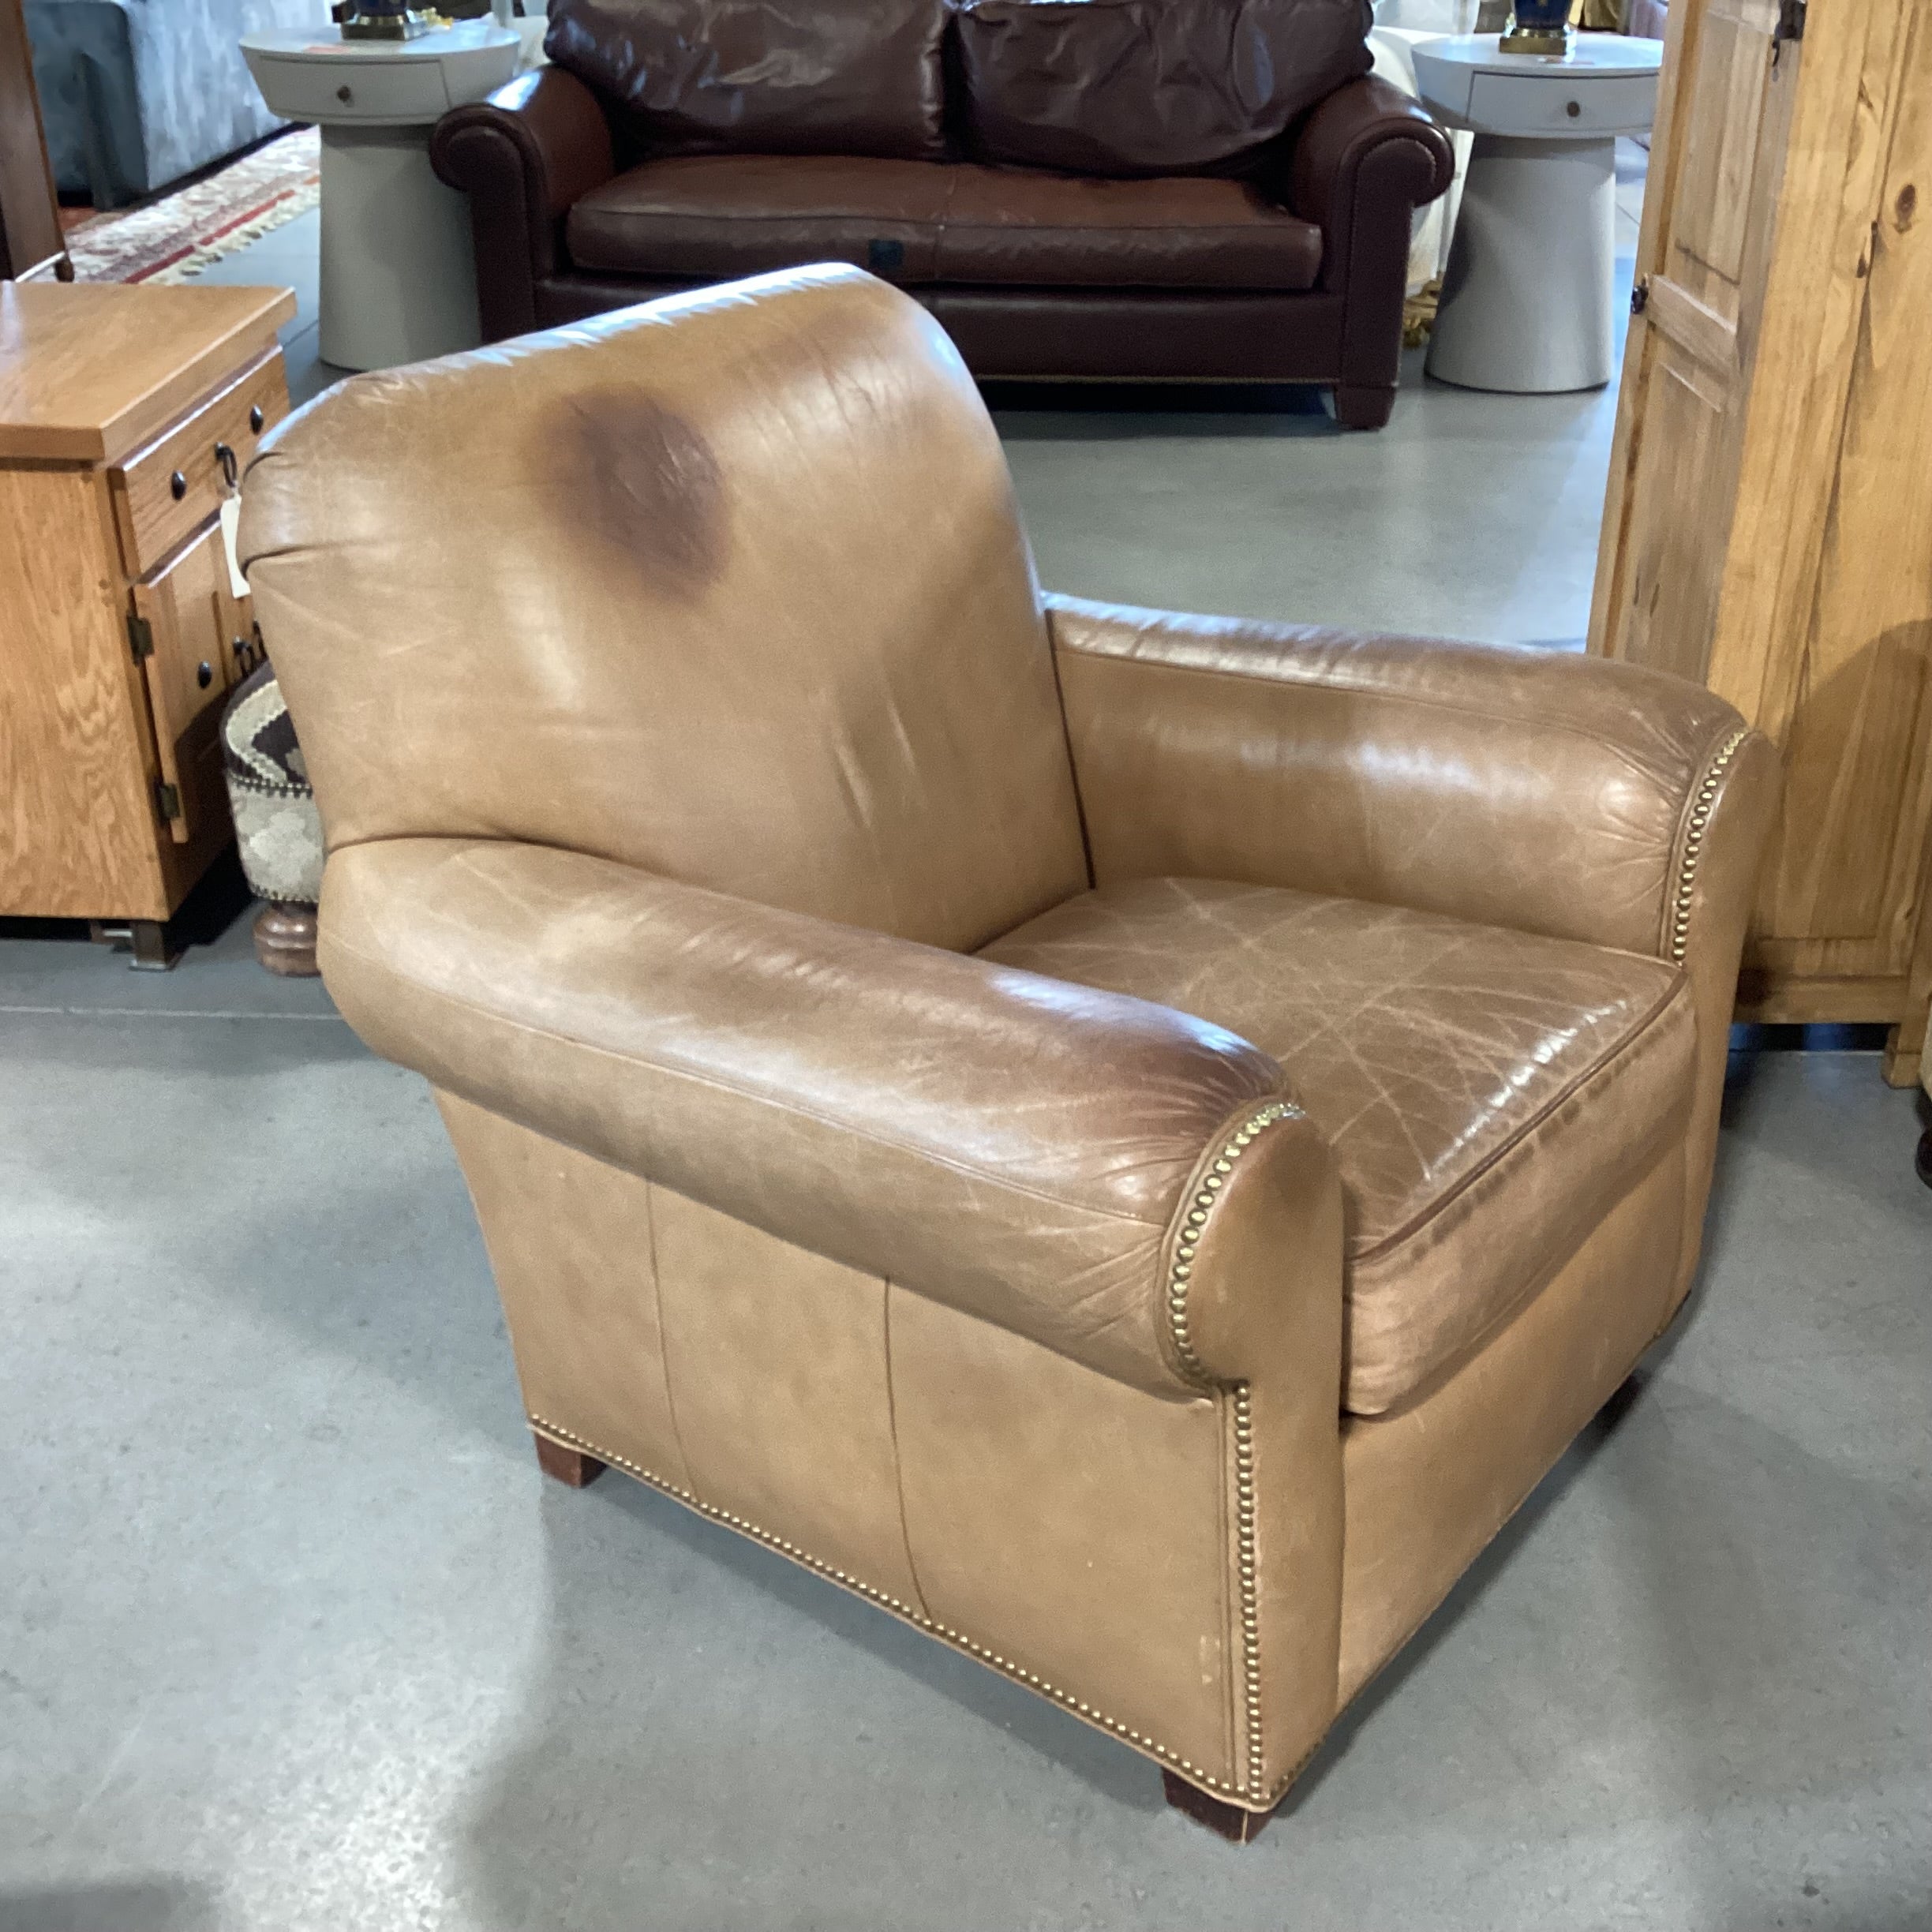 Hancook & Moore Leather Chair 33.5"x 35"x 36"